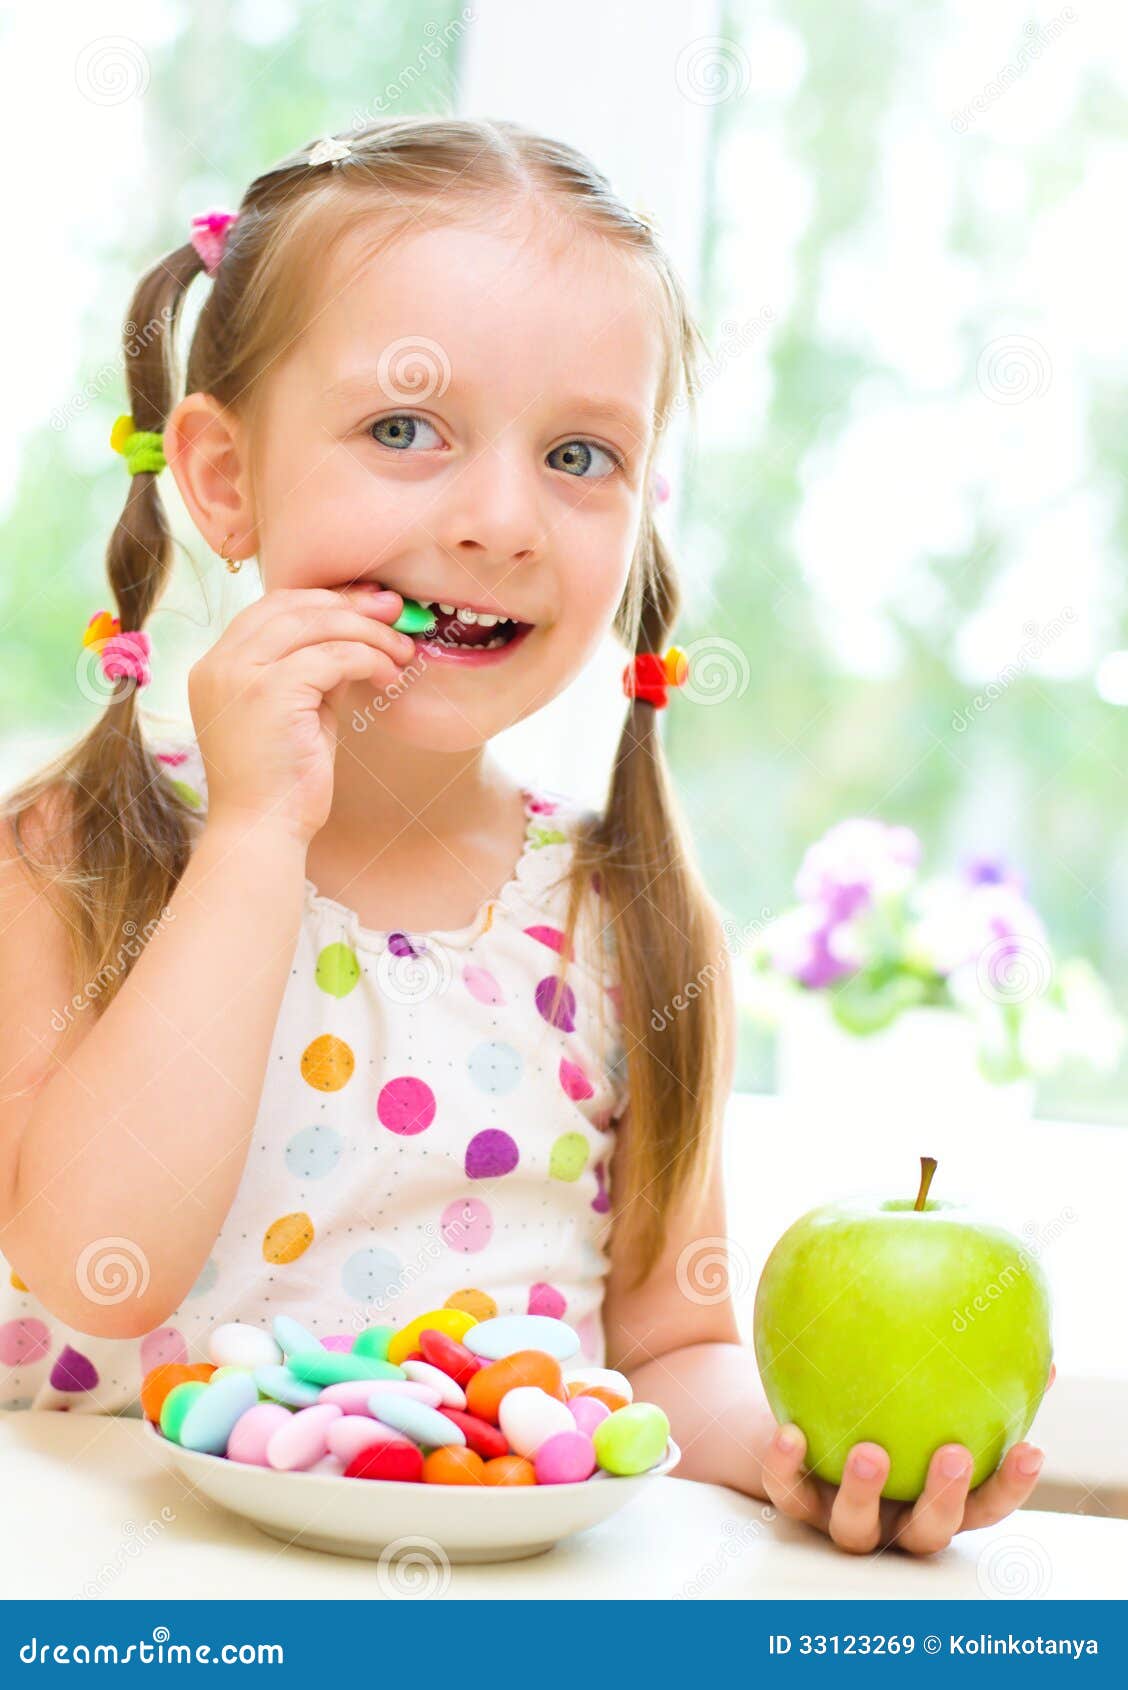 Girl Eating Candies Royalty Free Stock Images - Image: 33123269